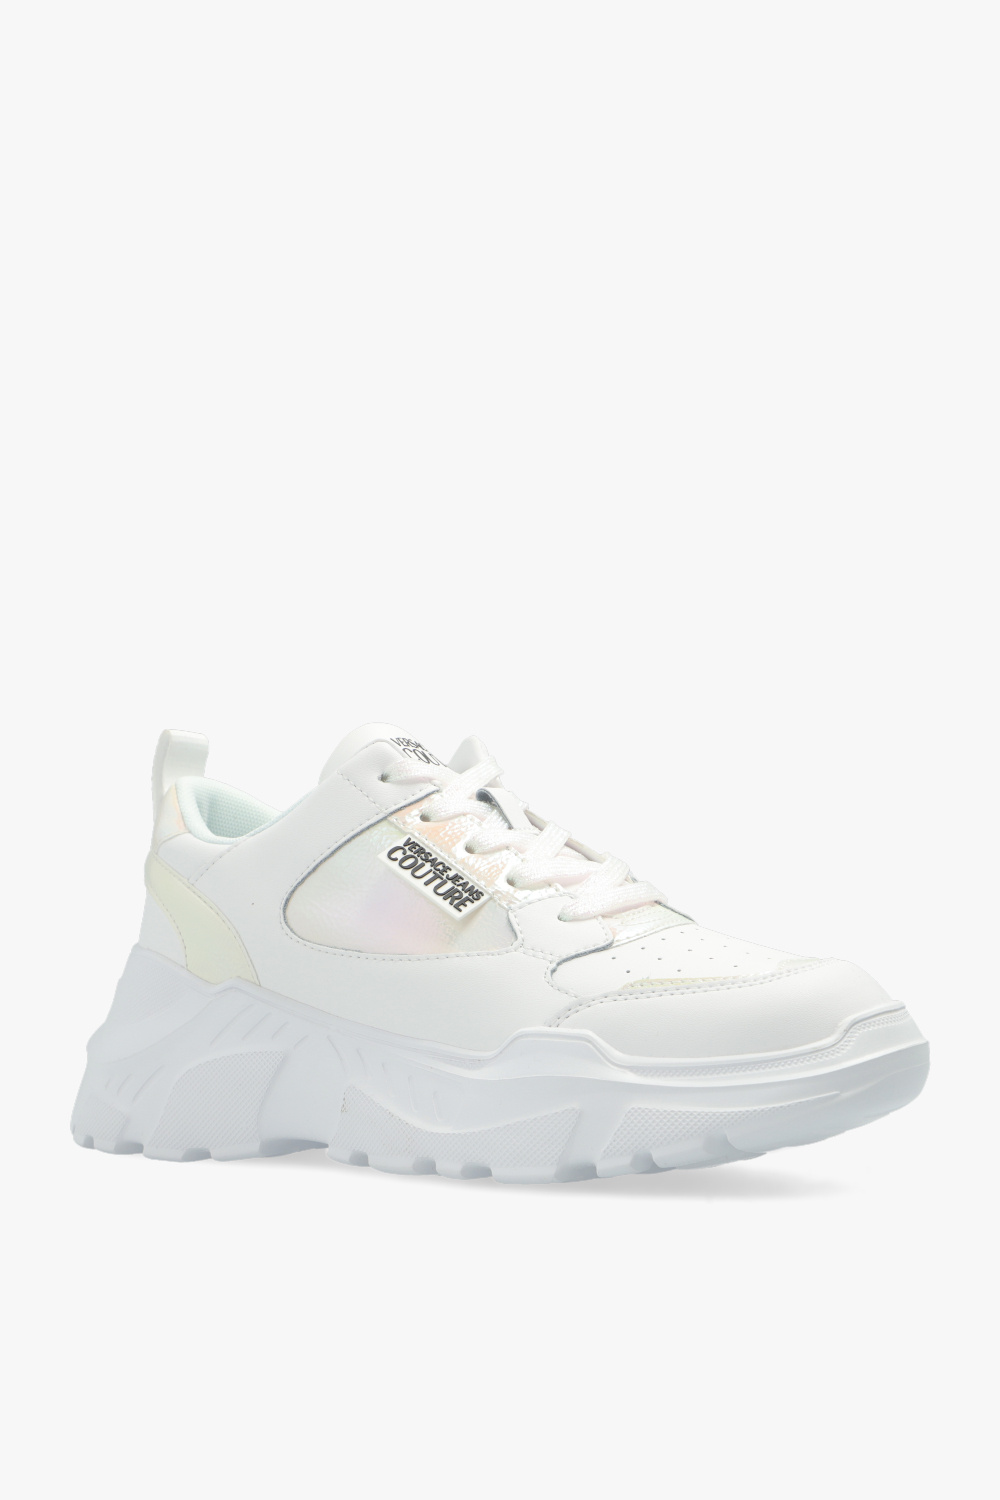 Versace Jeans Couture Brooks Adrenaline ASR 14 is the solid shoe for you if